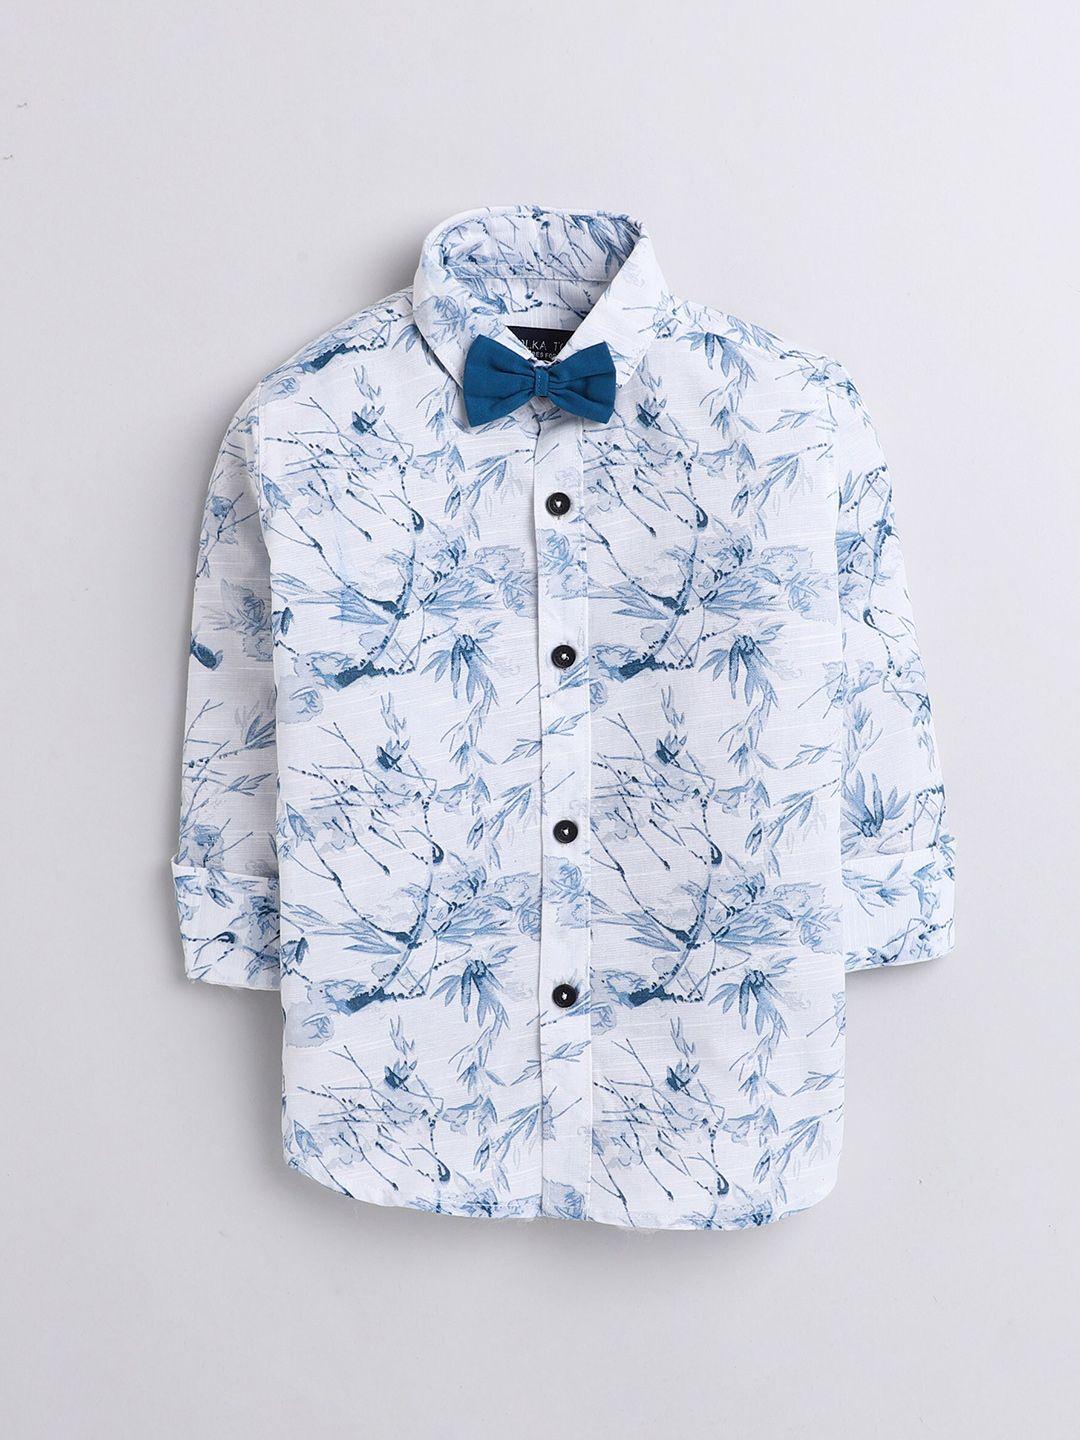 polka tots boys classic floral printed cotton casual shirt with bow tie